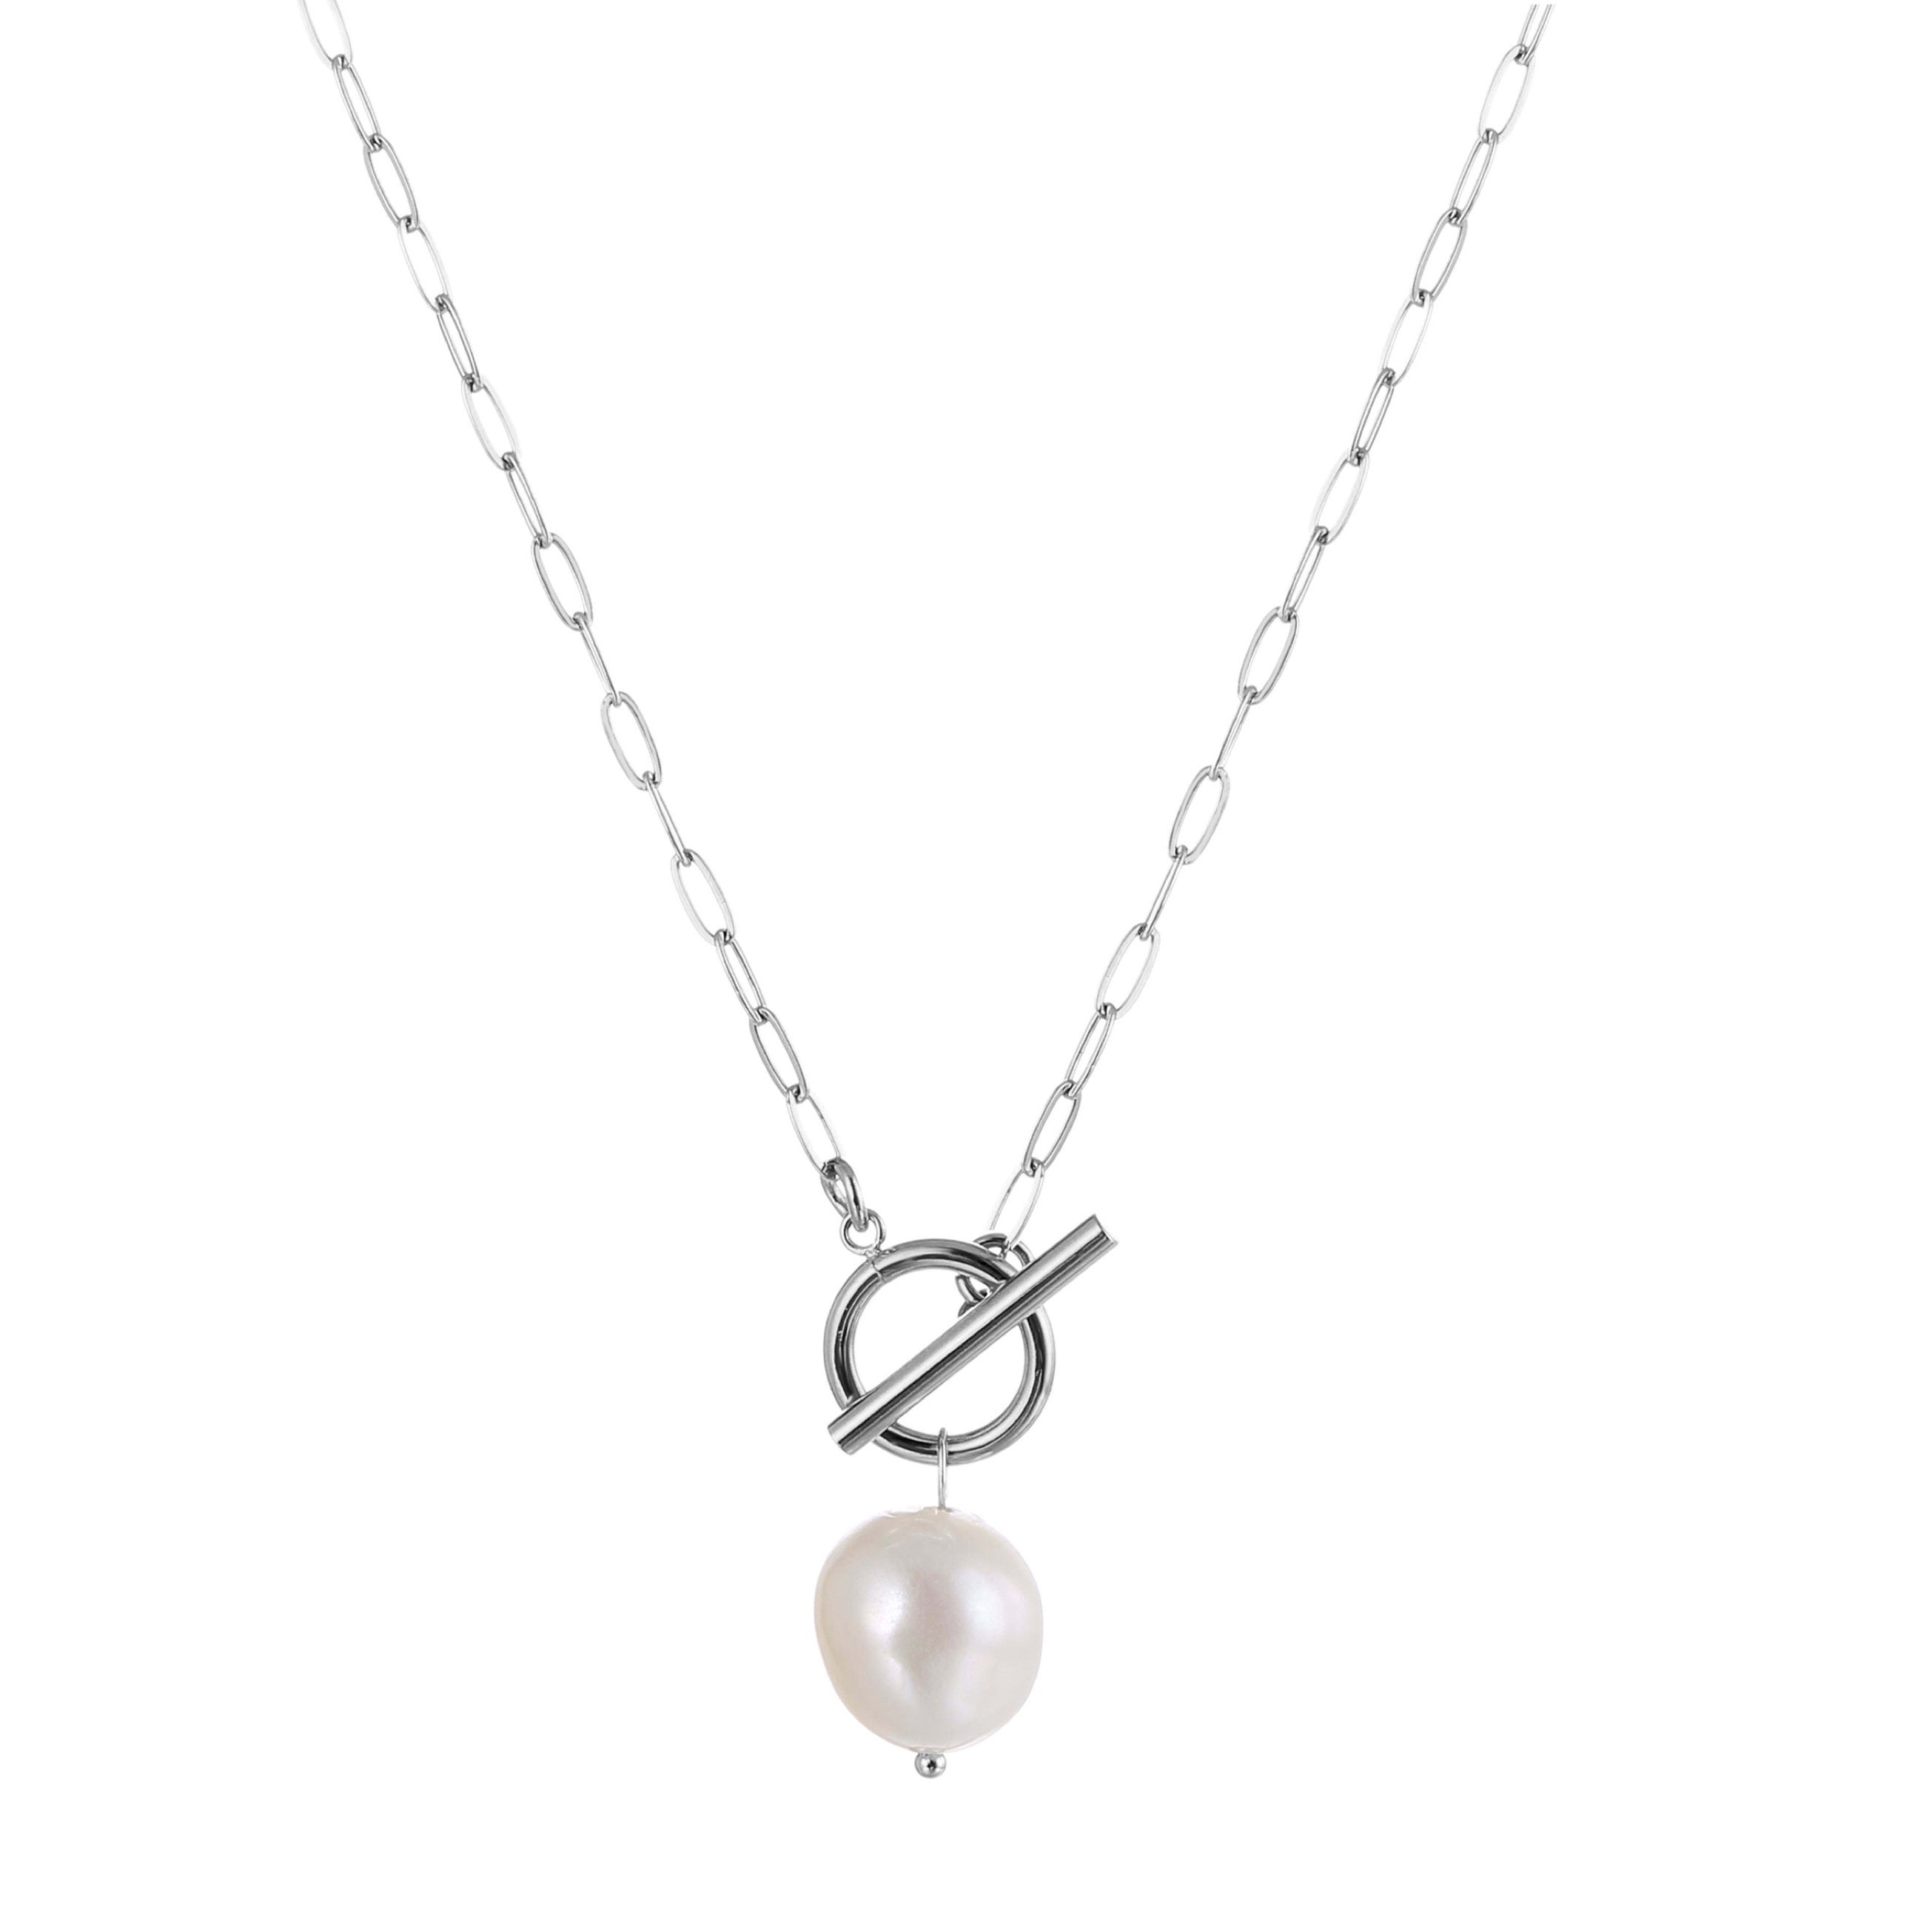 Beautifully crafted in the same design as our popular Sadie necklace this stunning necklace features one baroque freshwater pearl with a toggle clasp as well as a 5c